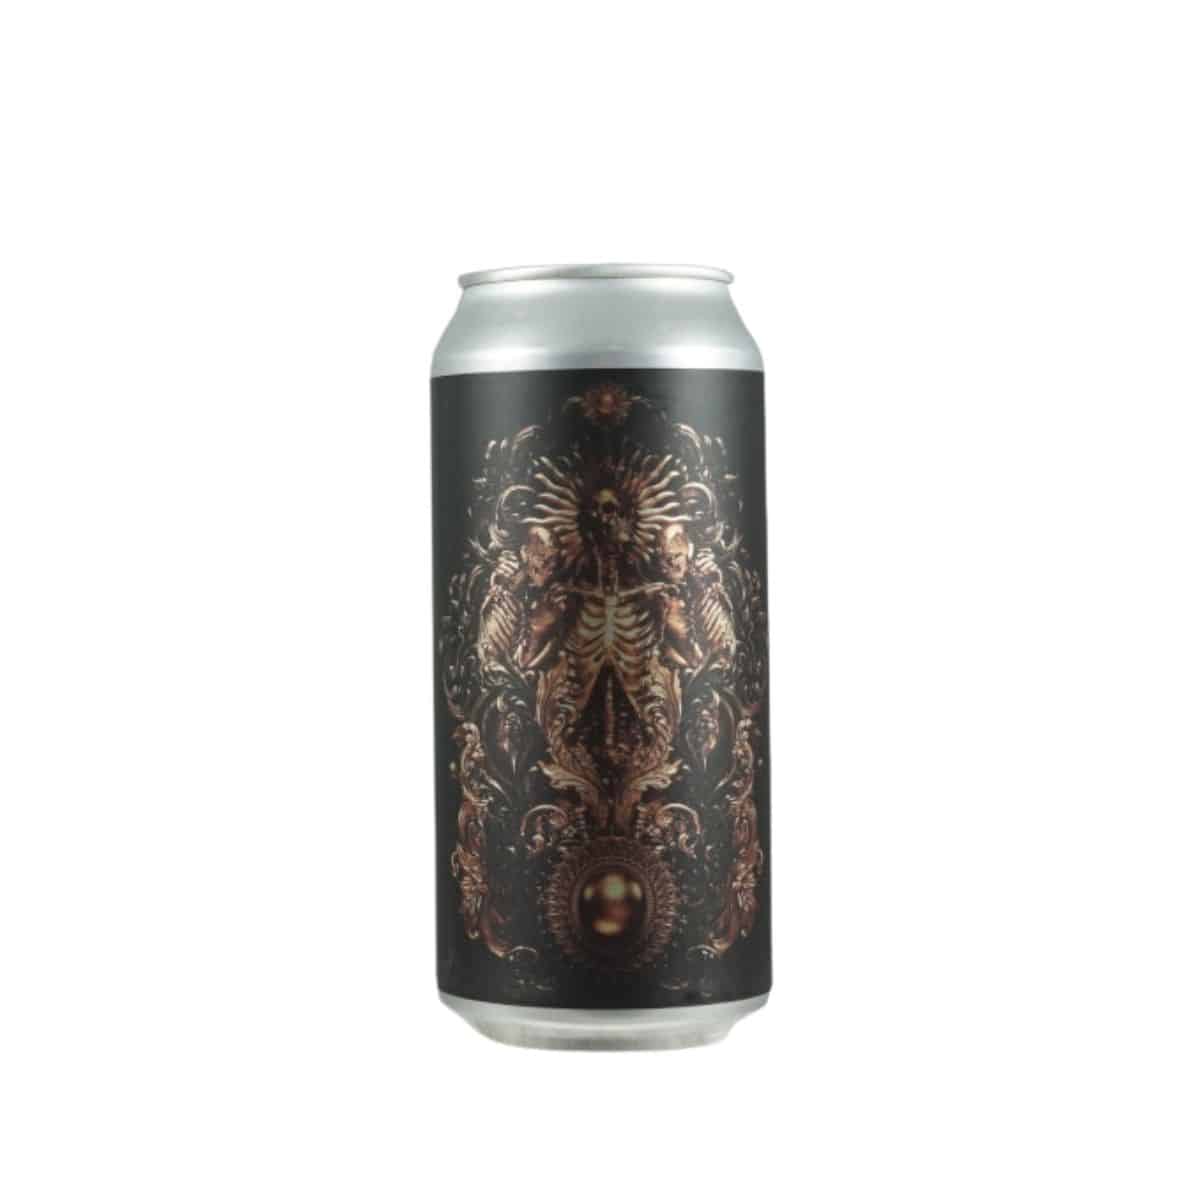 Northern Monk Great Notion Patrons Project 42.01